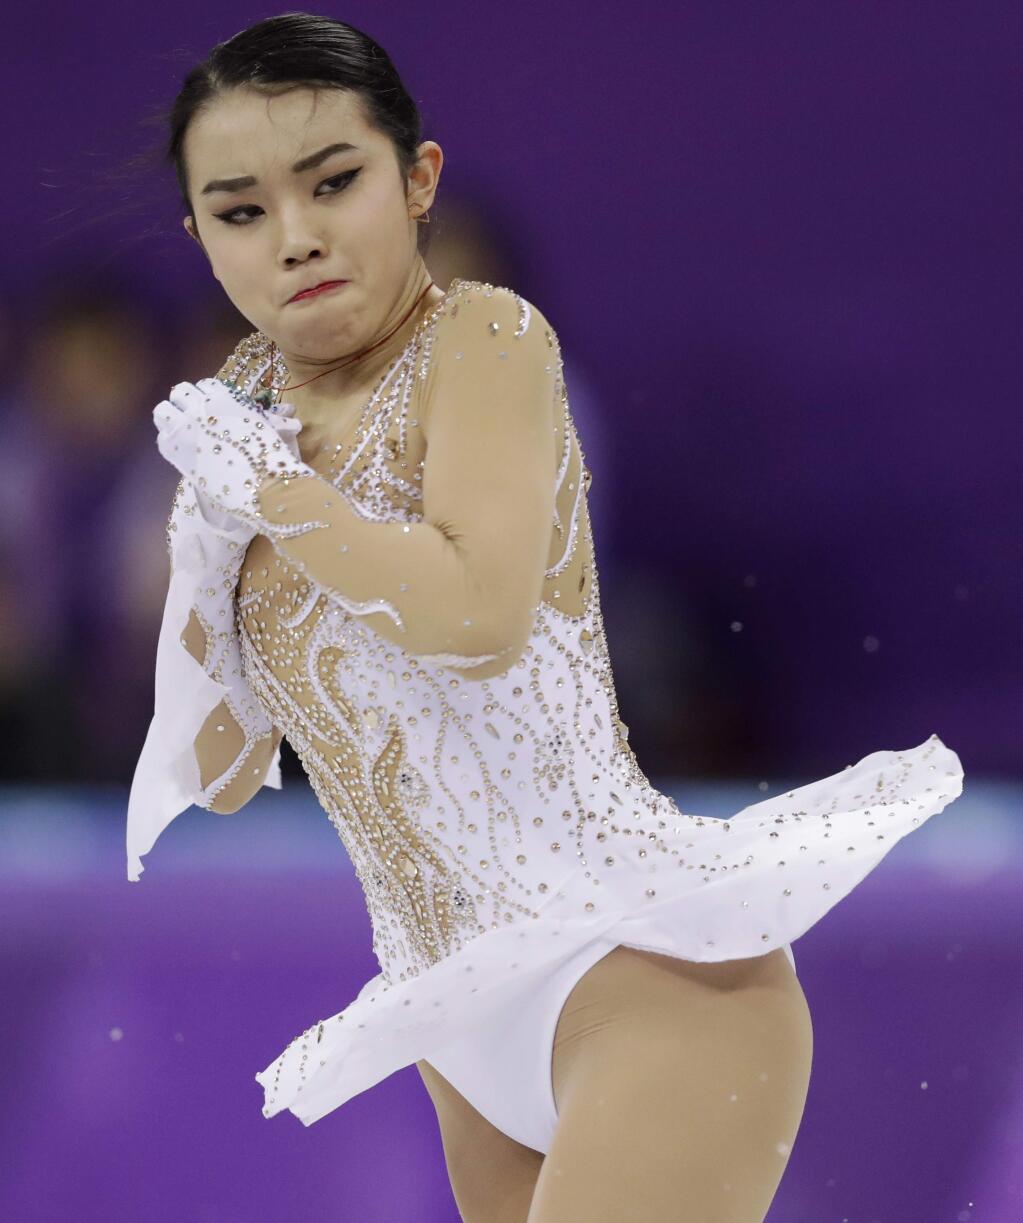 Karen Chen of the United States performs during the women's short program figure skating in the Gangneung Ice Arena at the 2018 Winter Olympics in Gangneung, South Korea, Wednesday, Feb. 21, 2018. (AP Photo/Bernat Armangue)